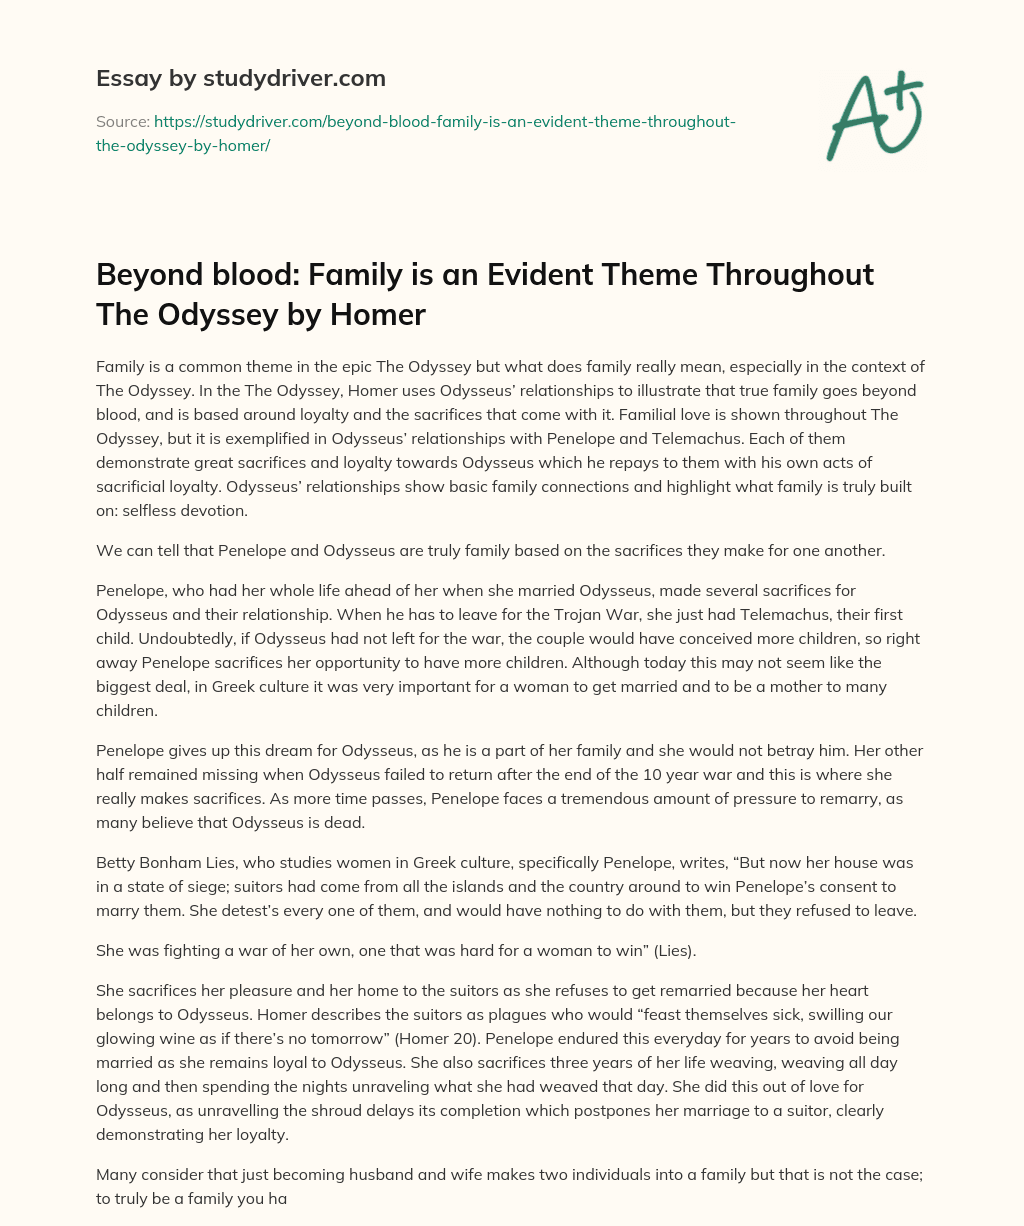 Beyond Blood: Family is an Evident Theme Throughout the Odyssey by Homer essay